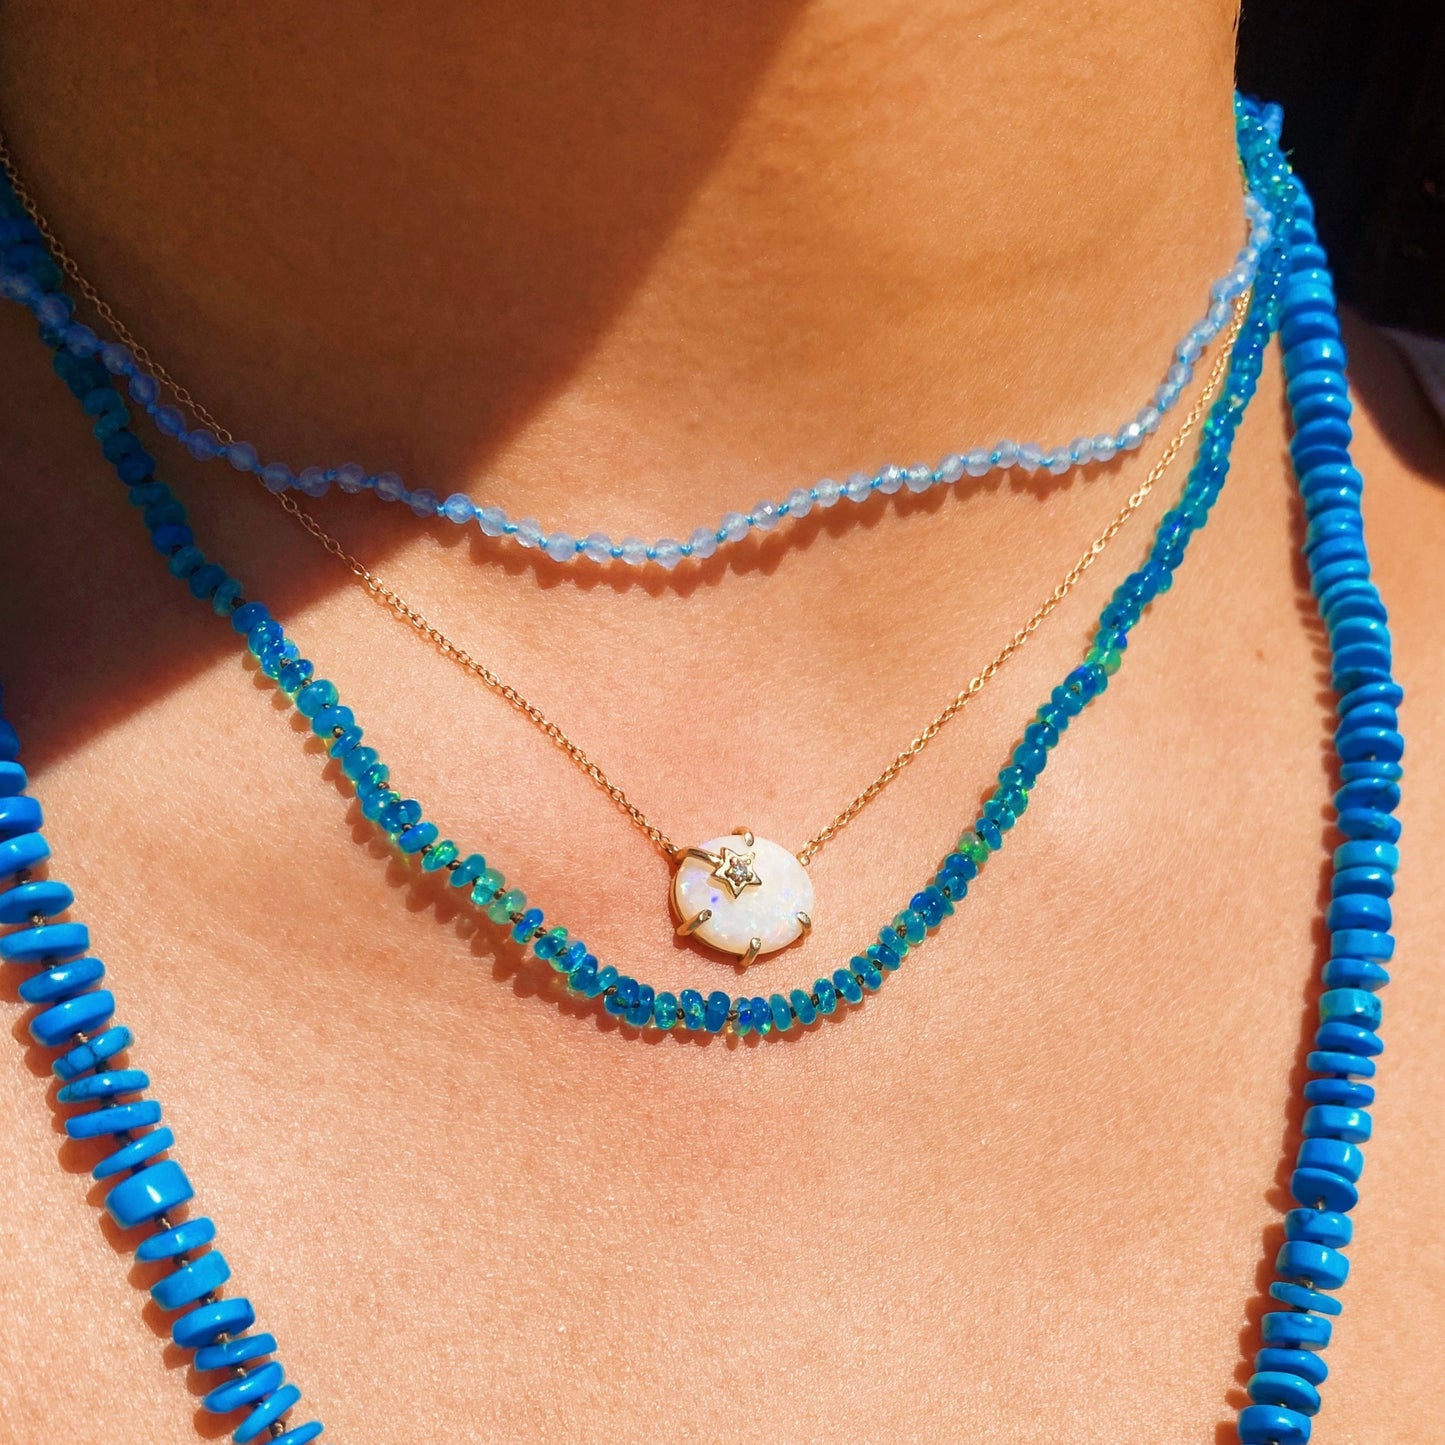 Teal Ethiopian Opal Beaded Necklace with Chocolate Silk Thread